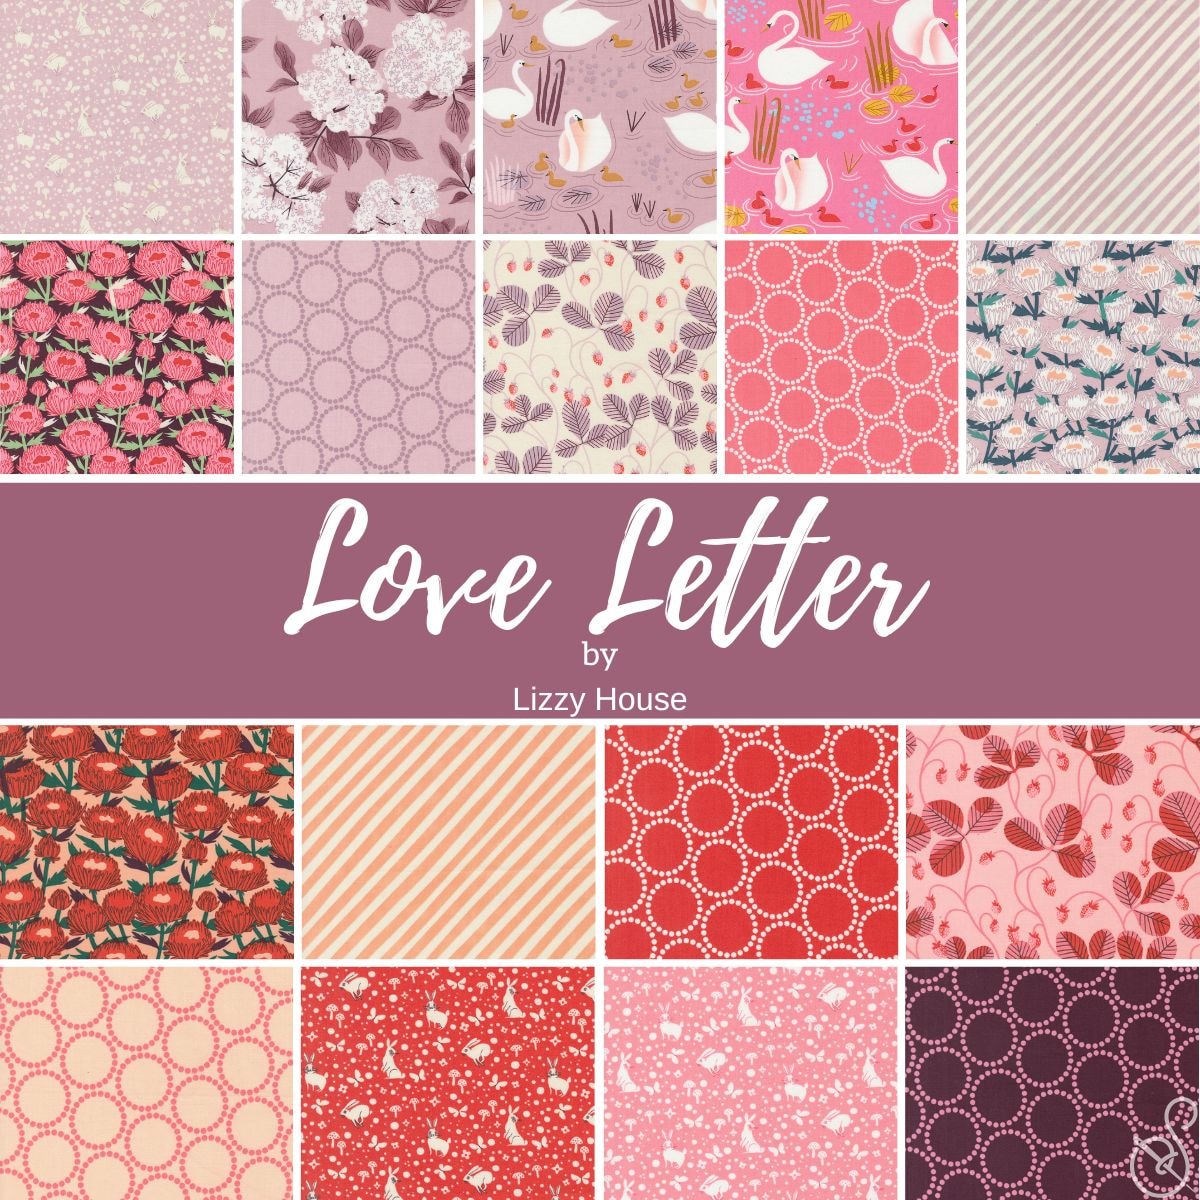 Love Letter Fat Quarter Bundle | Lizzy House - Pink/Red Colorway 18 FQs